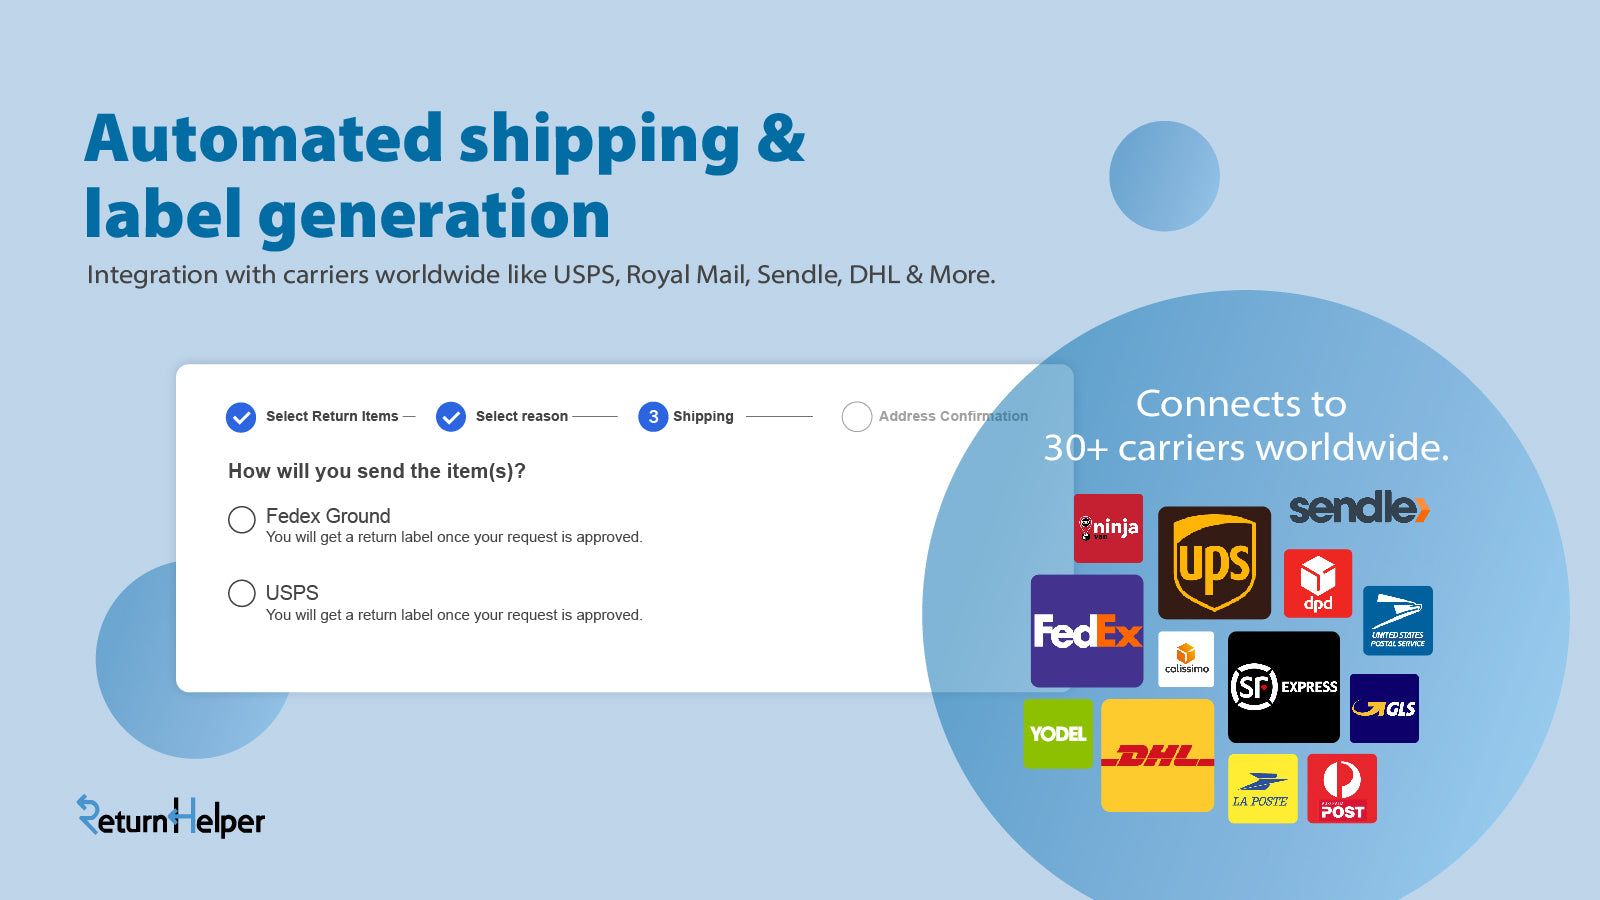 Automated shipping & label generation